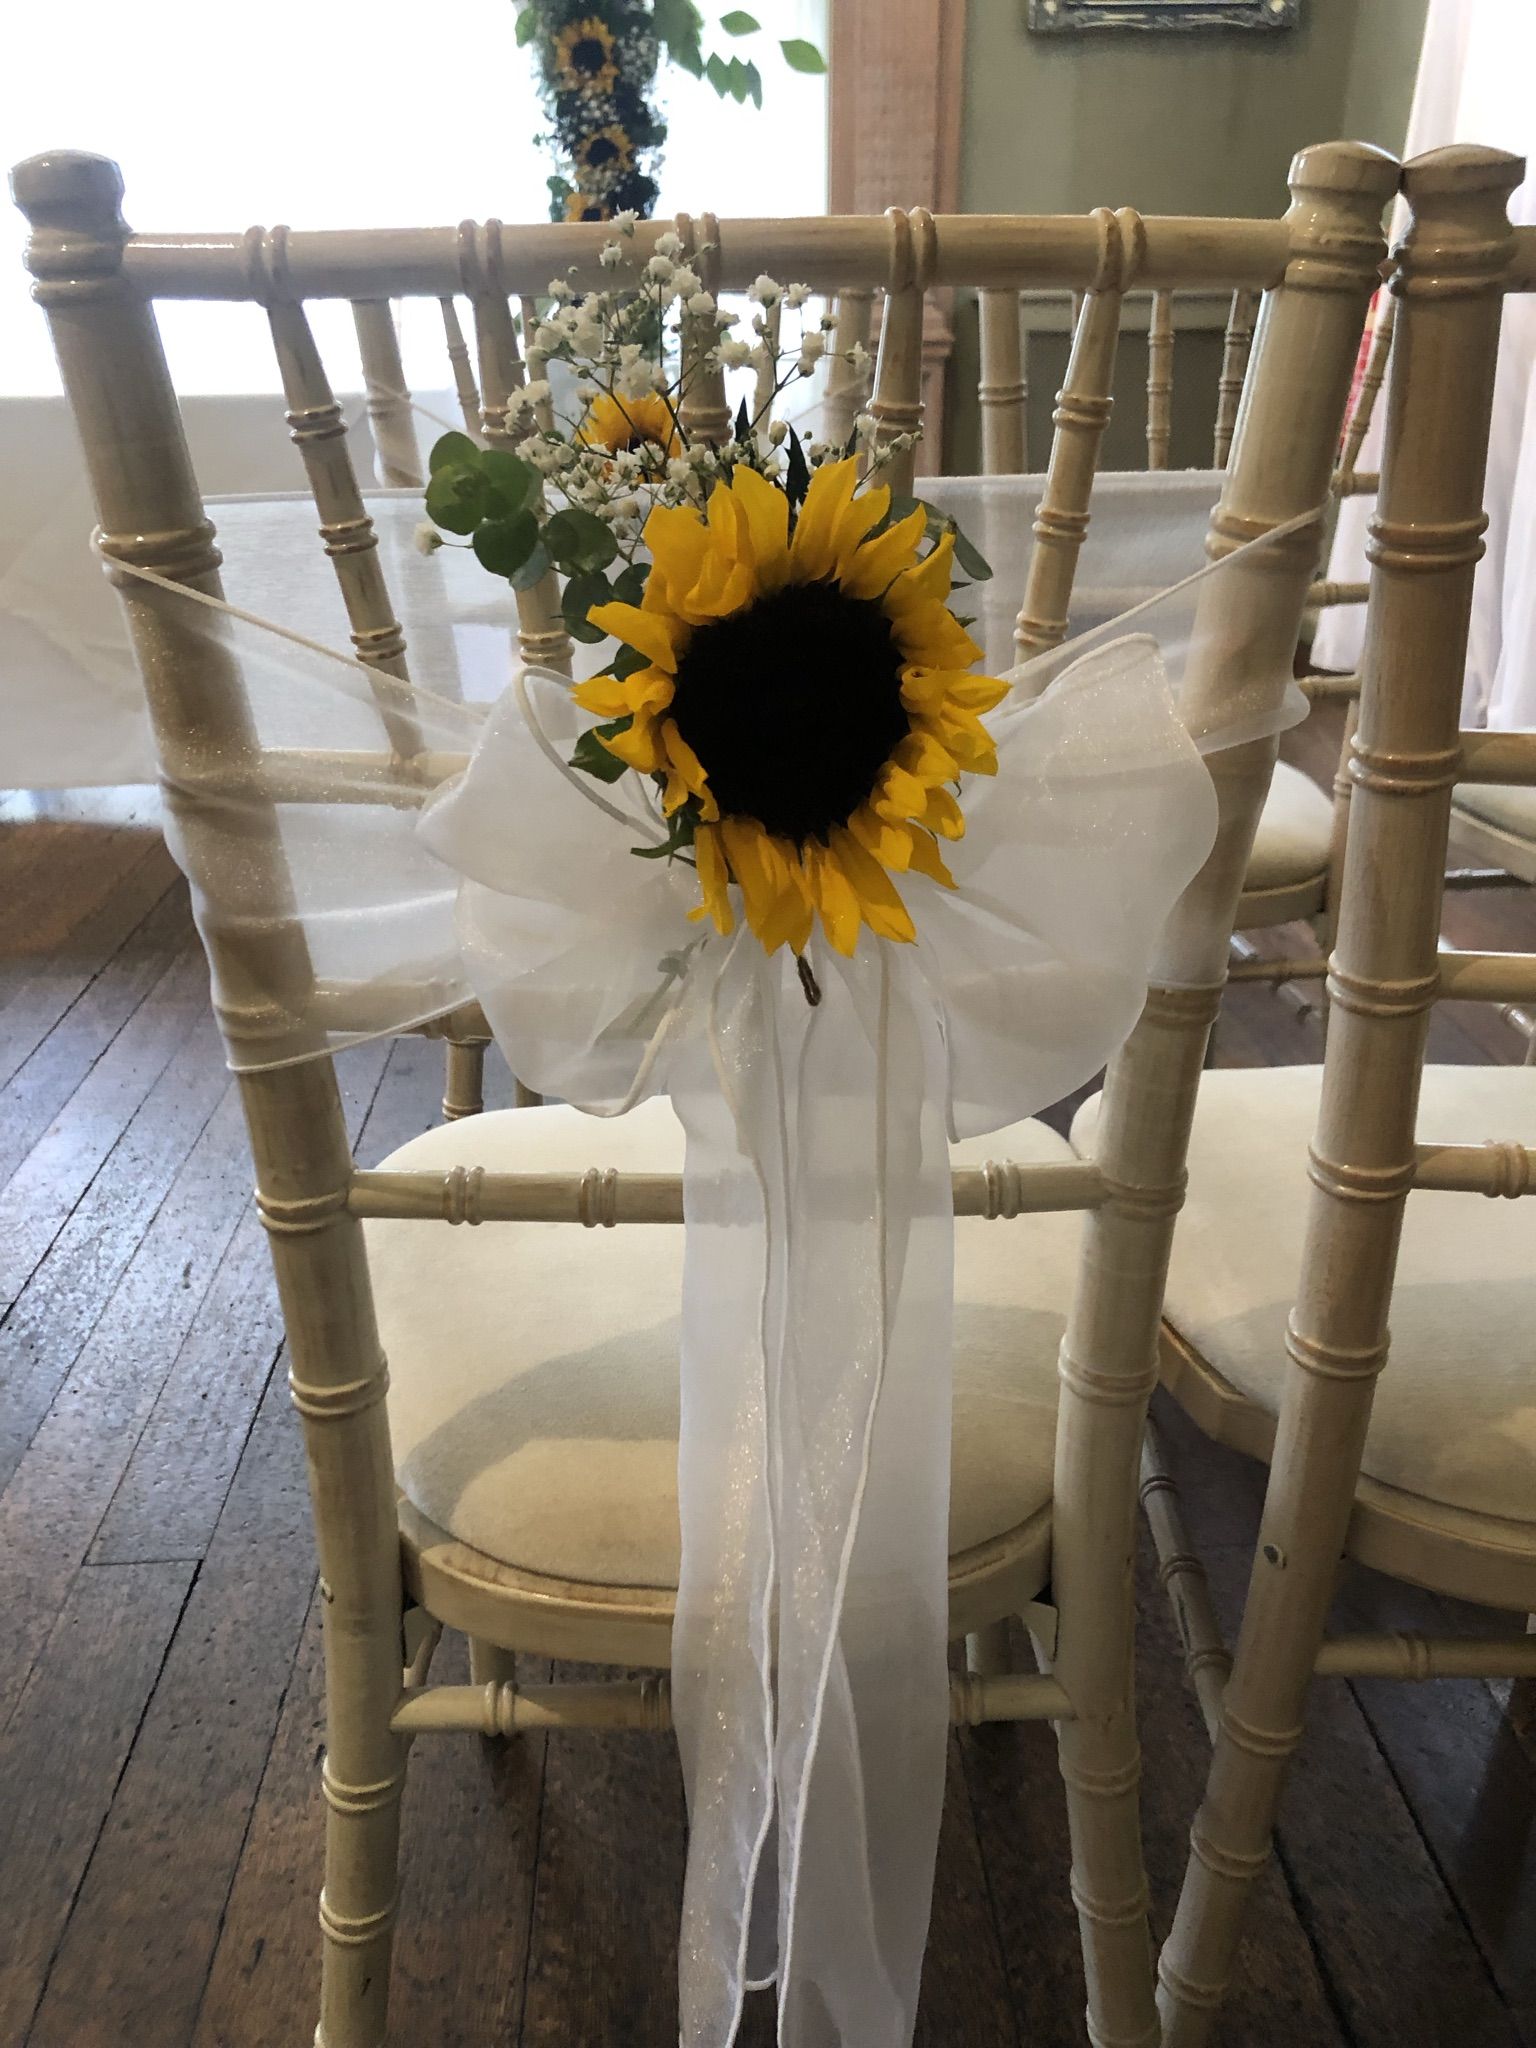 a bouquet of sunflowers tied to a chair.